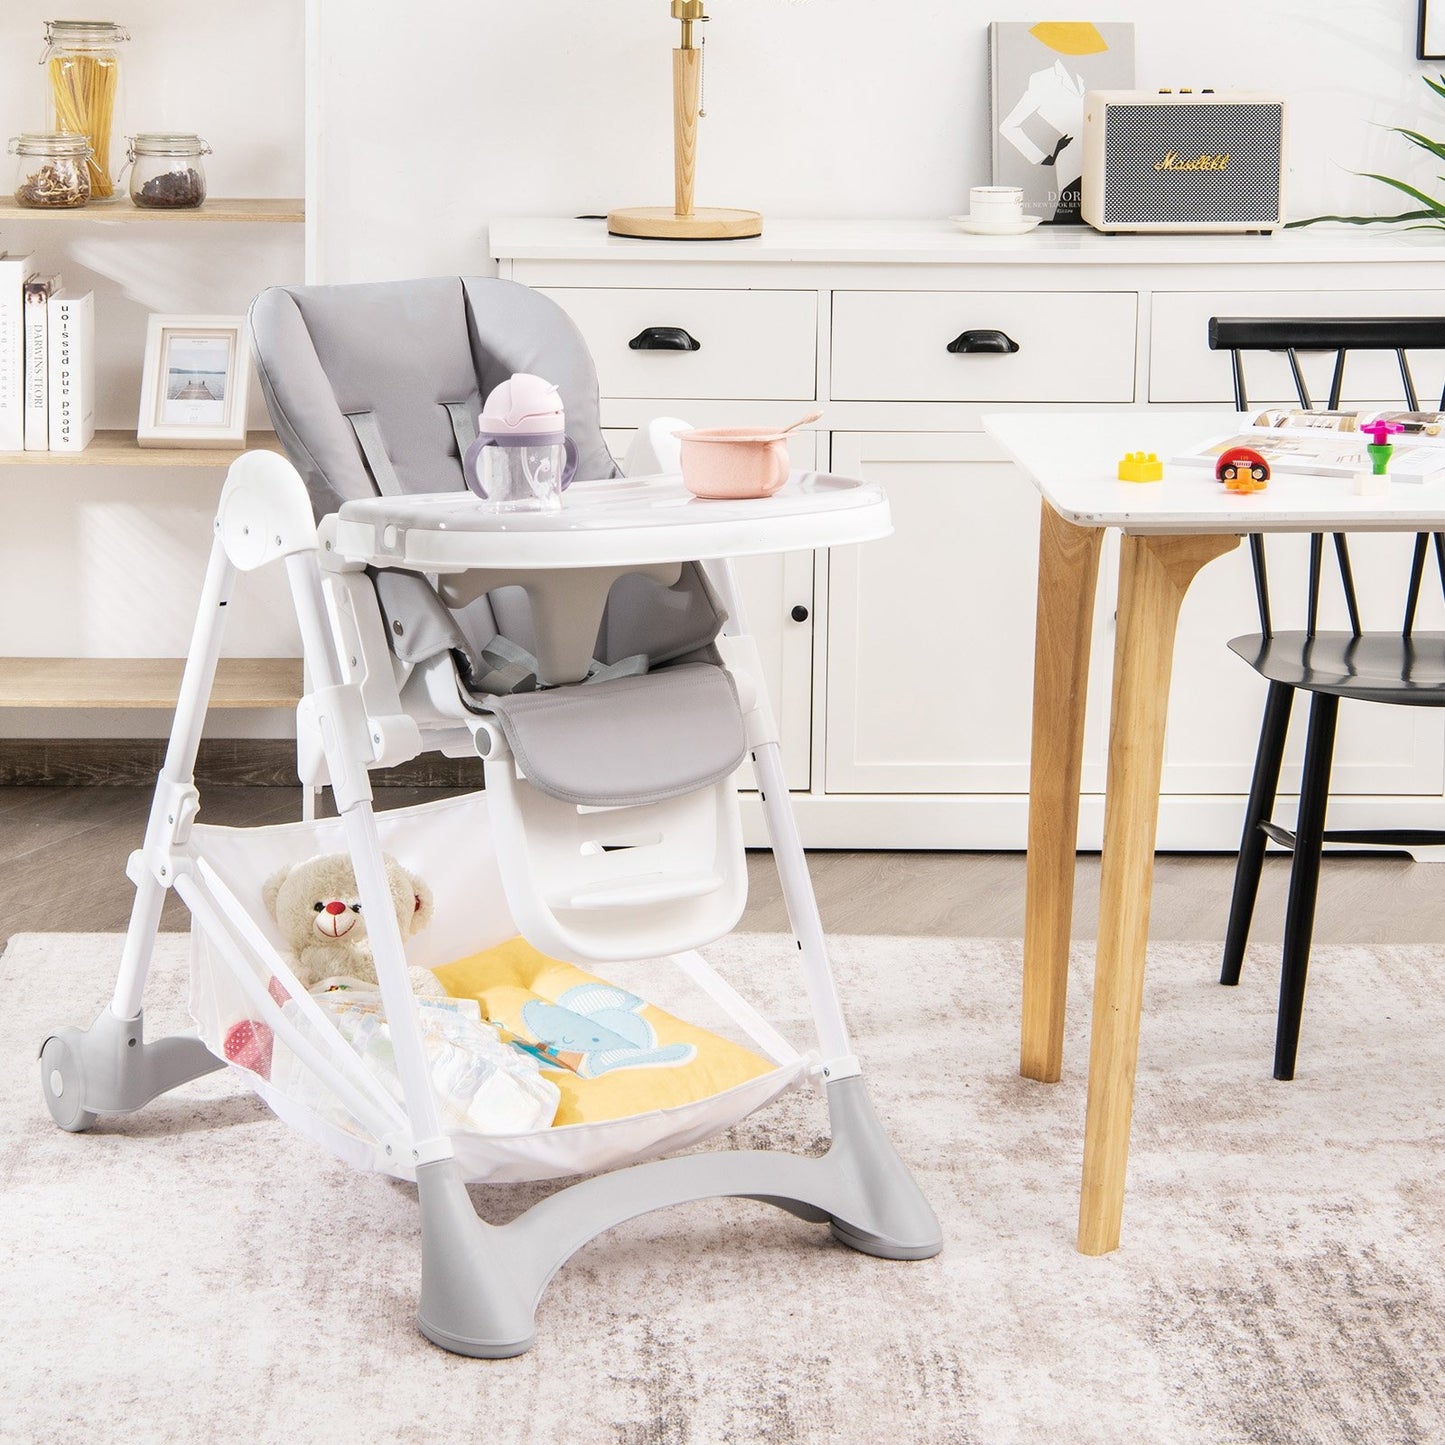 Baby Convertible Folding Adjustable High Chair with Wheel Tray Storage Basket, Gray